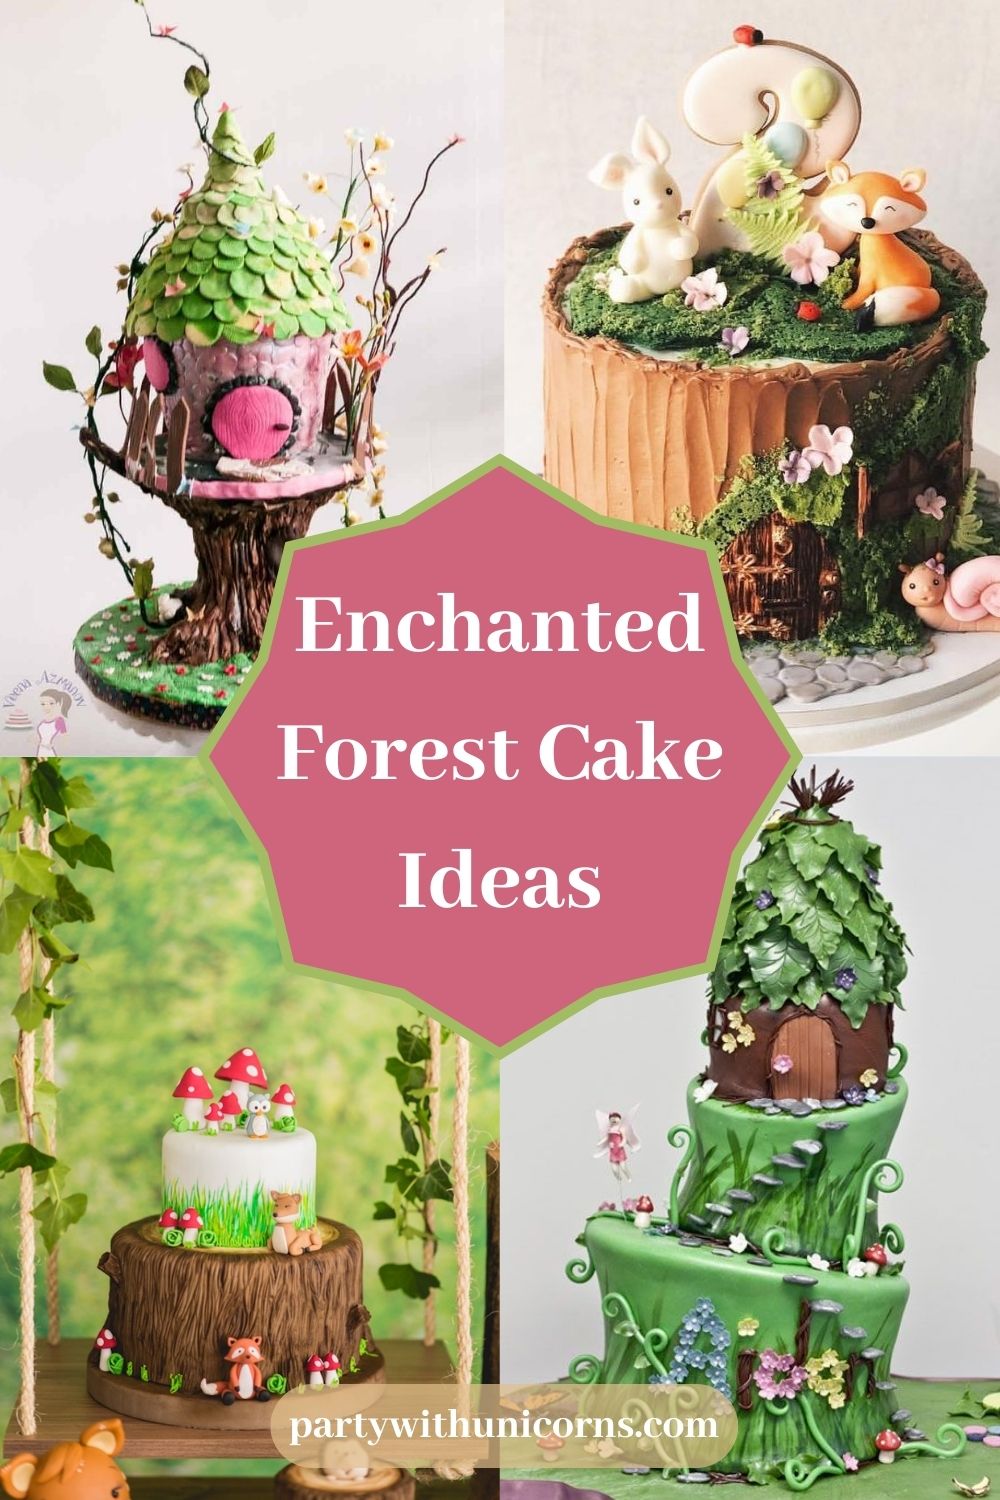 Enchanted Forest Cake Ideas